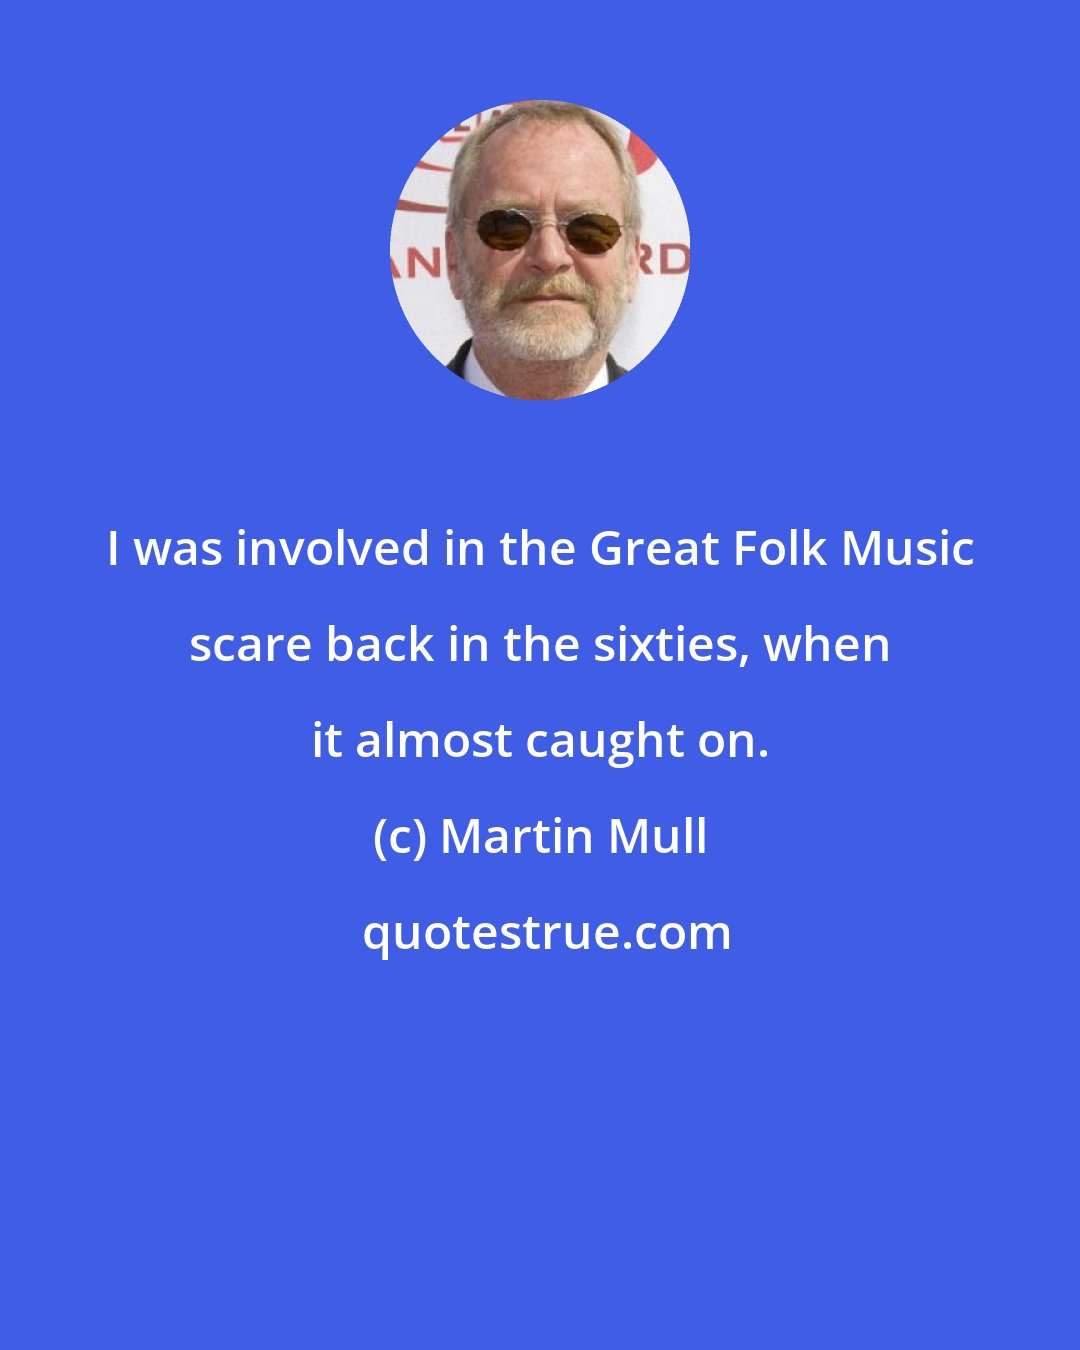 Martin Mull: I was involved in the Great Folk Music scare back in the sixties, when it almost caught on.